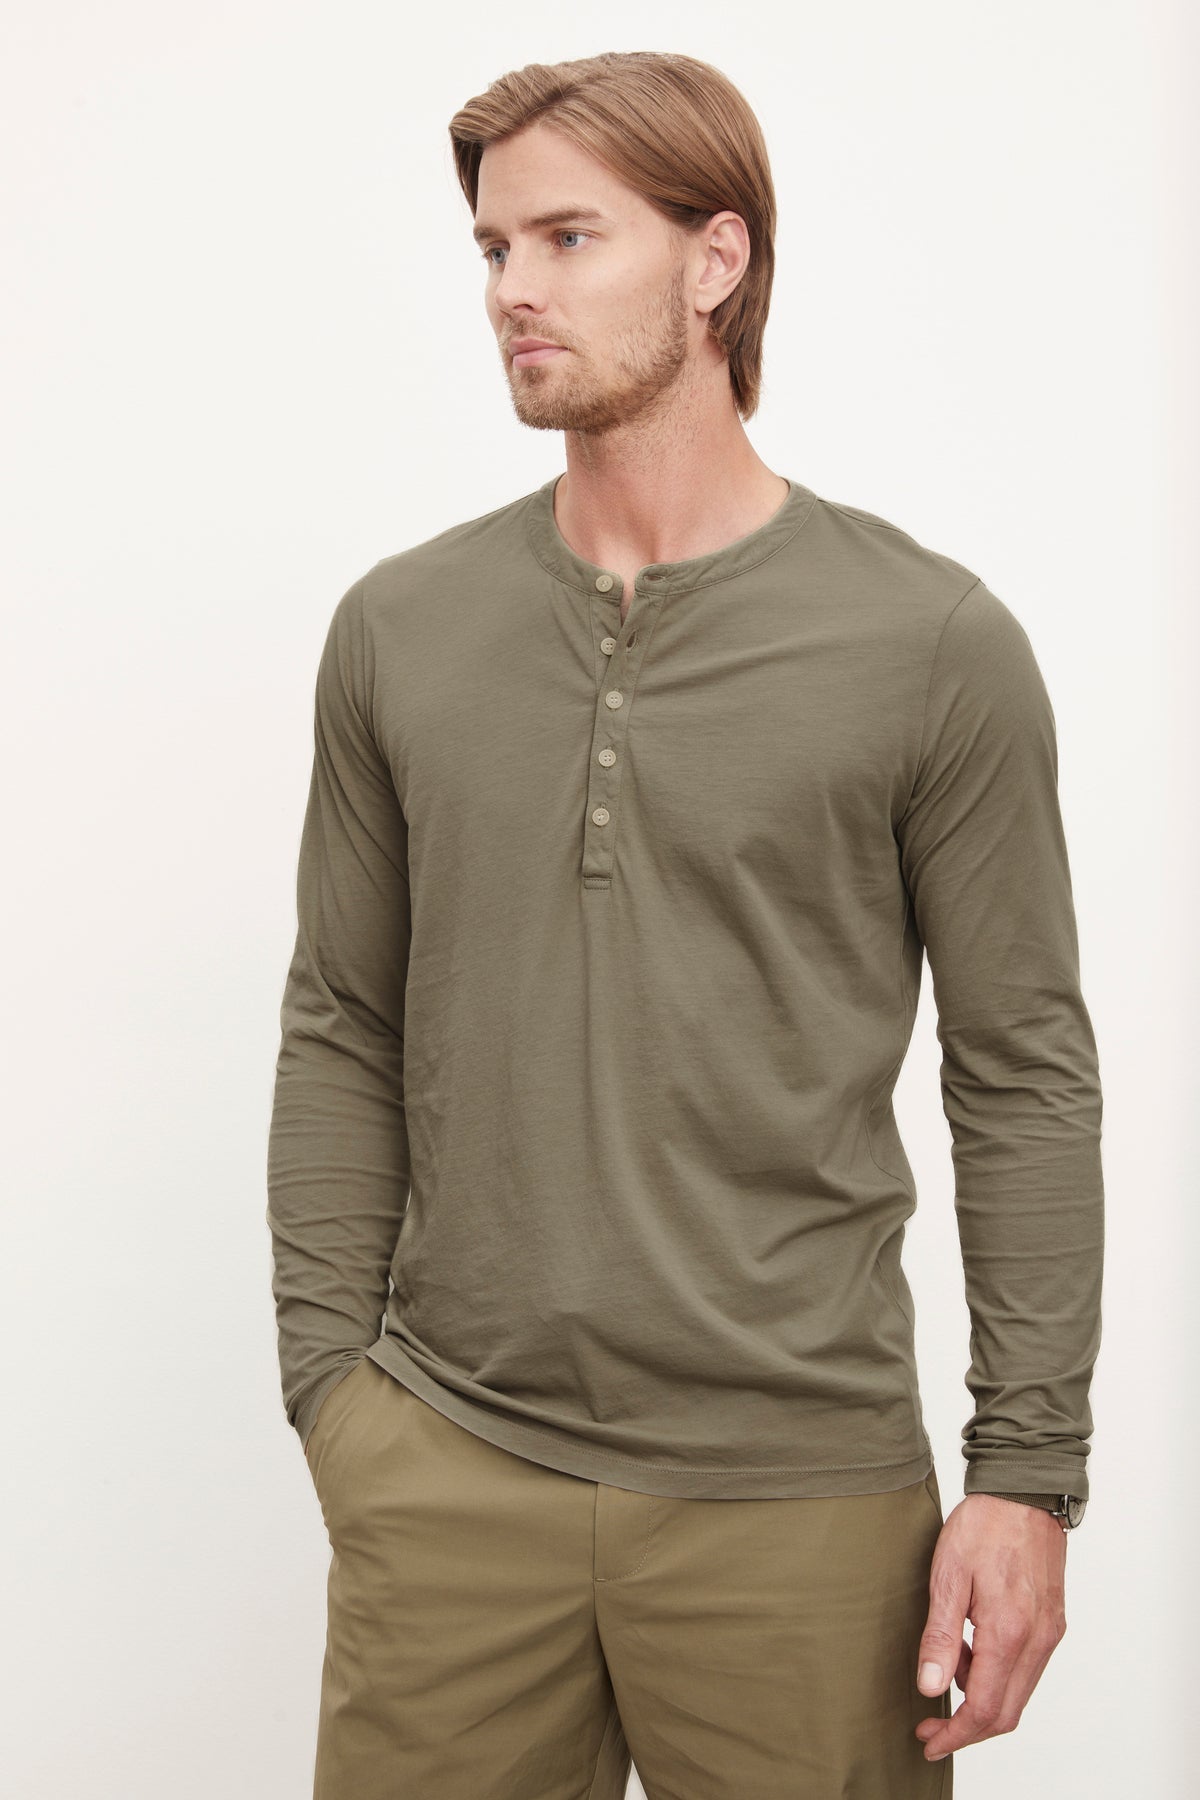   A man wearing a Velvet by Graham & Spencer ALVARO COTTON JERSEY HENLEY shirt paired with matching whisper knit pants, standing against a plain background. 